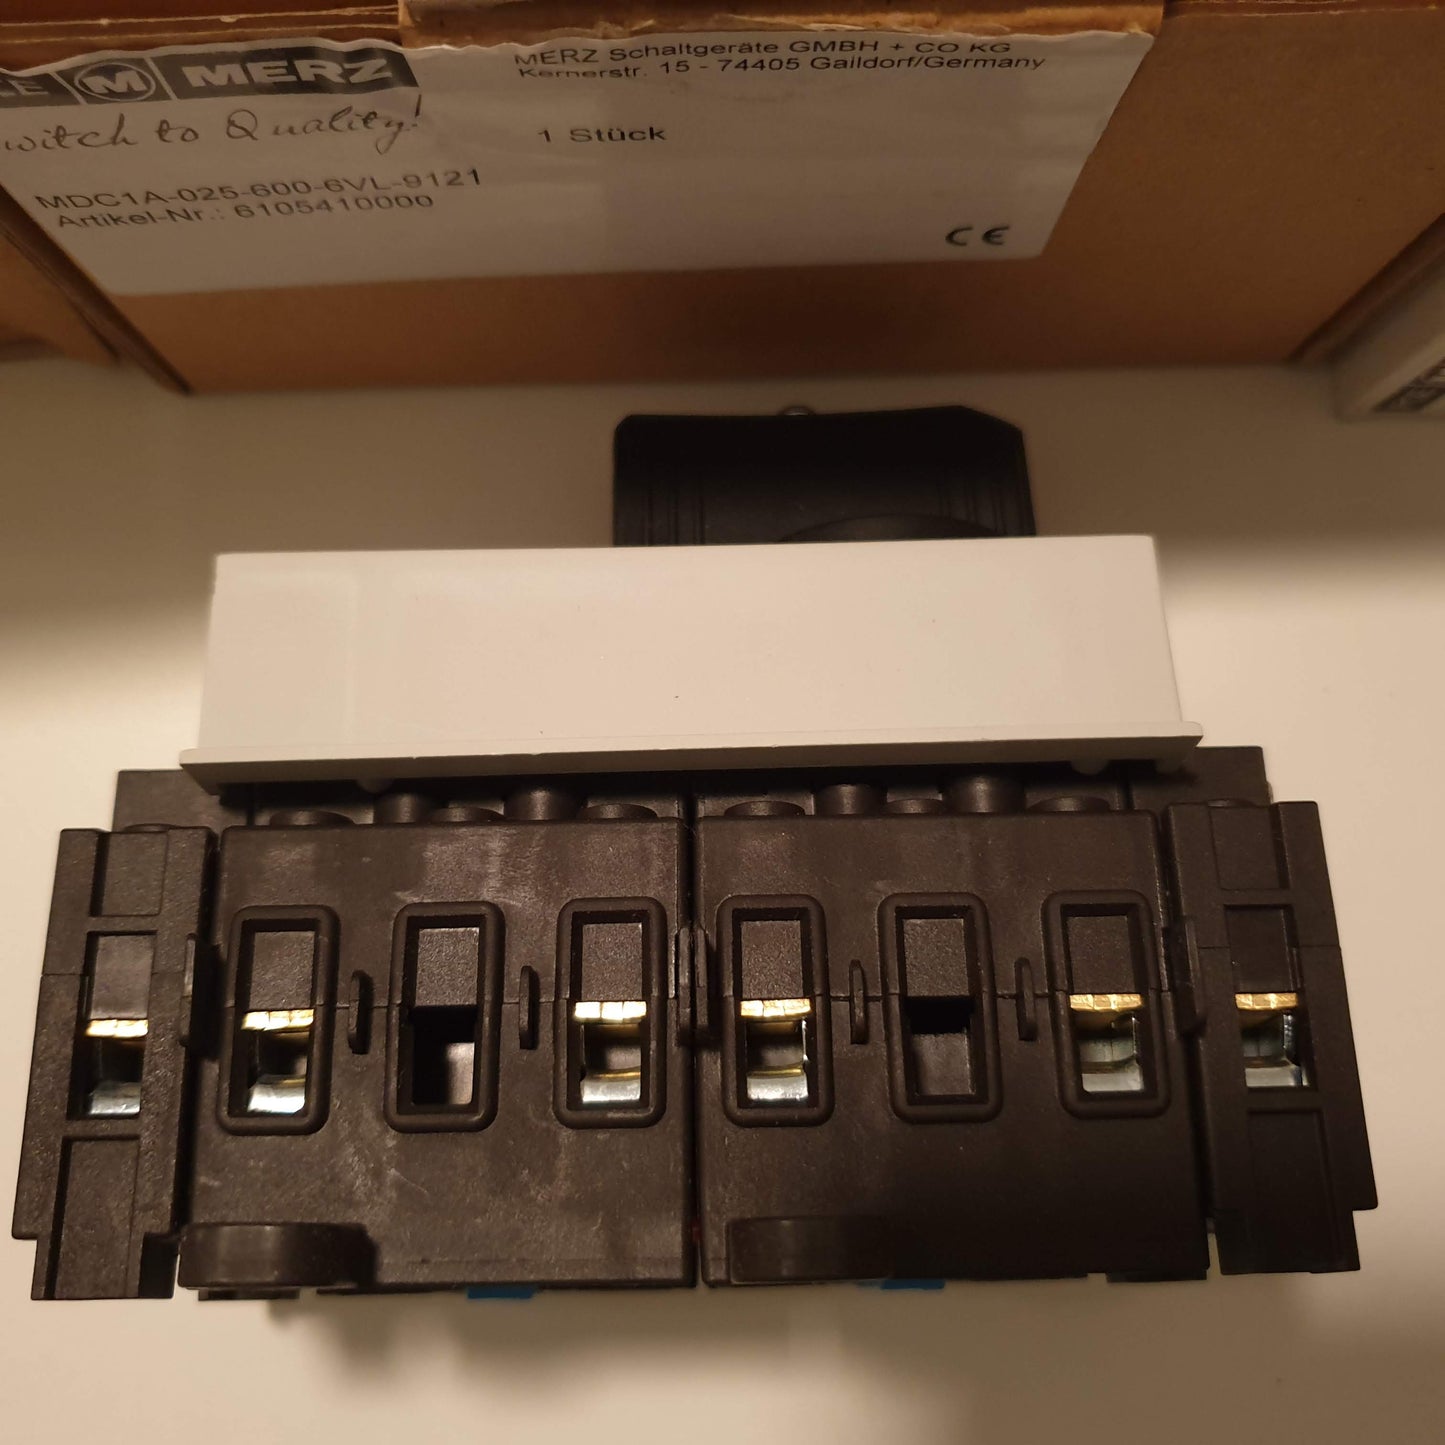 Switch, 160A/48Vdc, 2 switches with 2 contacts; Merz MDC1A-025-600-6VL-9121